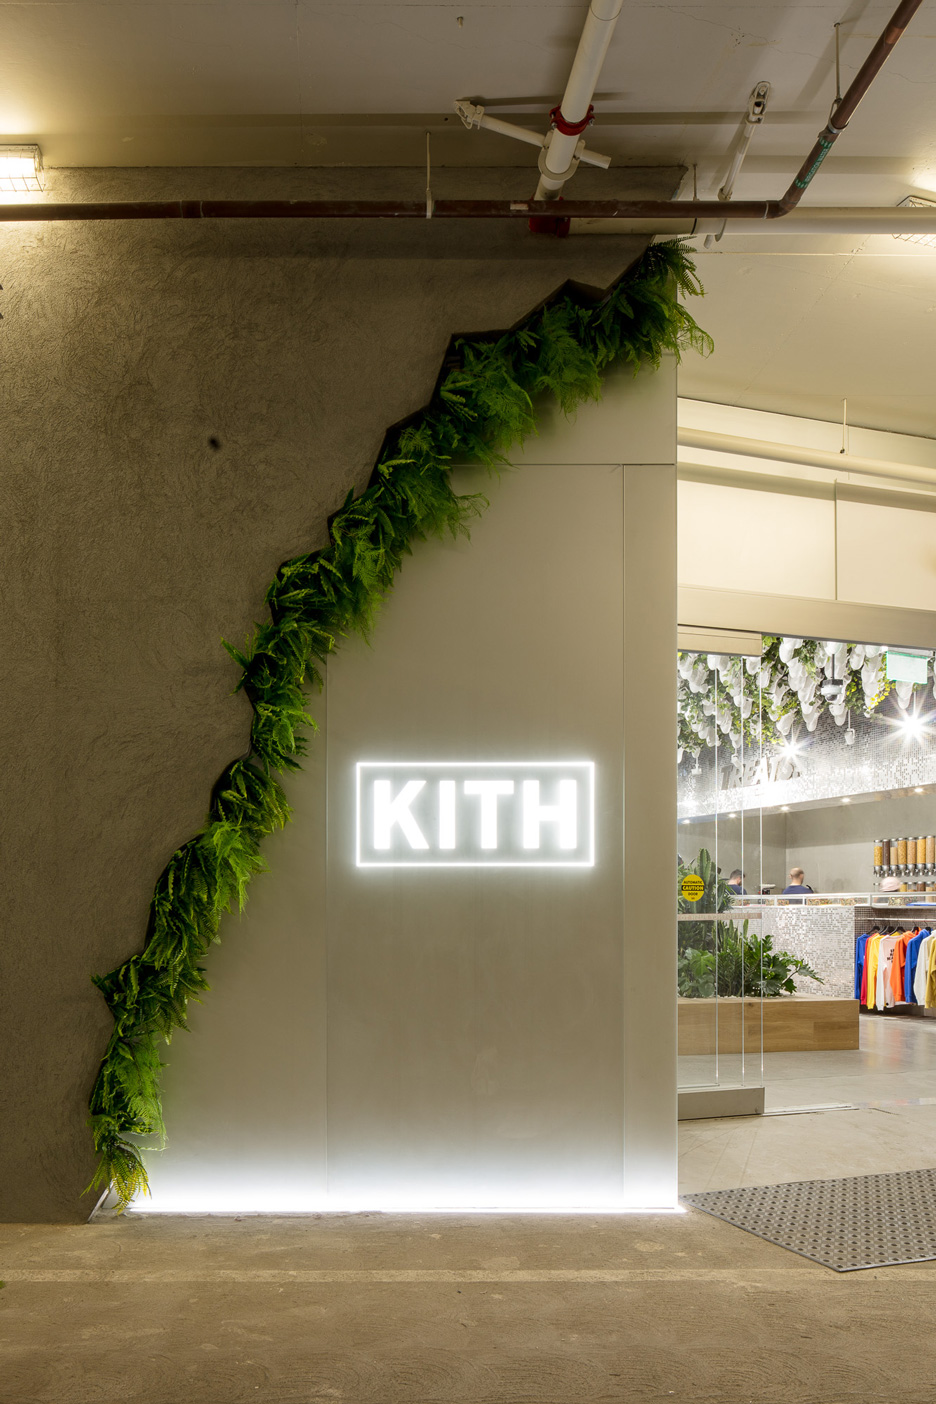 Snarkitecture uses recycled materials for Pharrell Williams' store in Miami